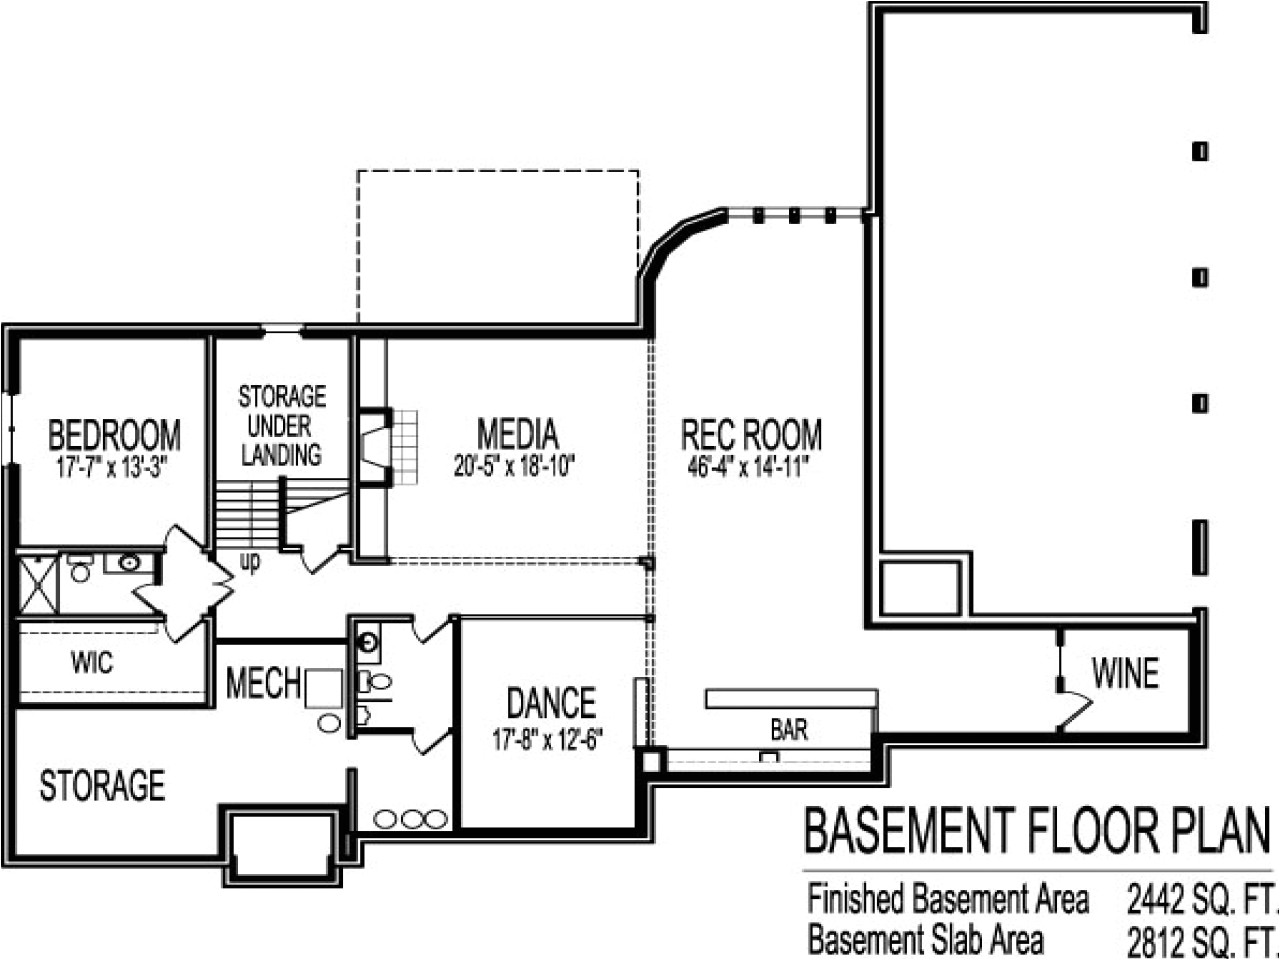 f382f934a5d86a05 2 bedroom ranch house plans 2 bedroom house plans with basement